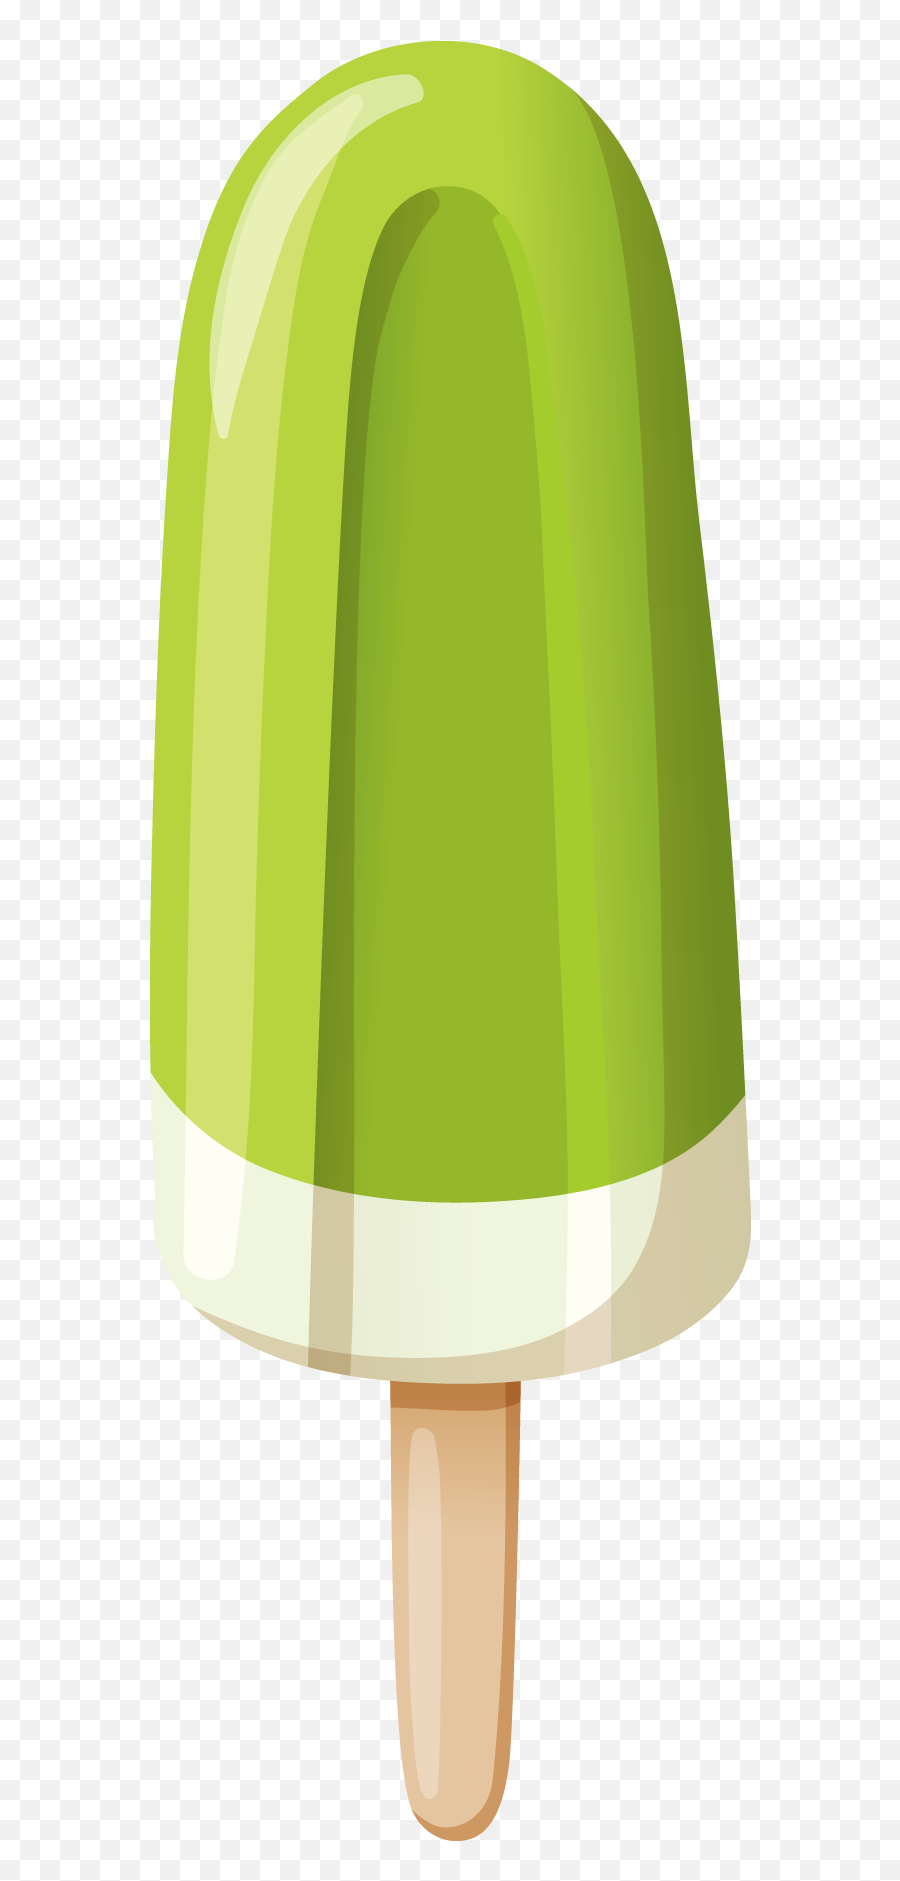 Download Hd 0147 15 29 - Ice Cream Popsicle Png Transparent Green Popsicle,Popsicle Png